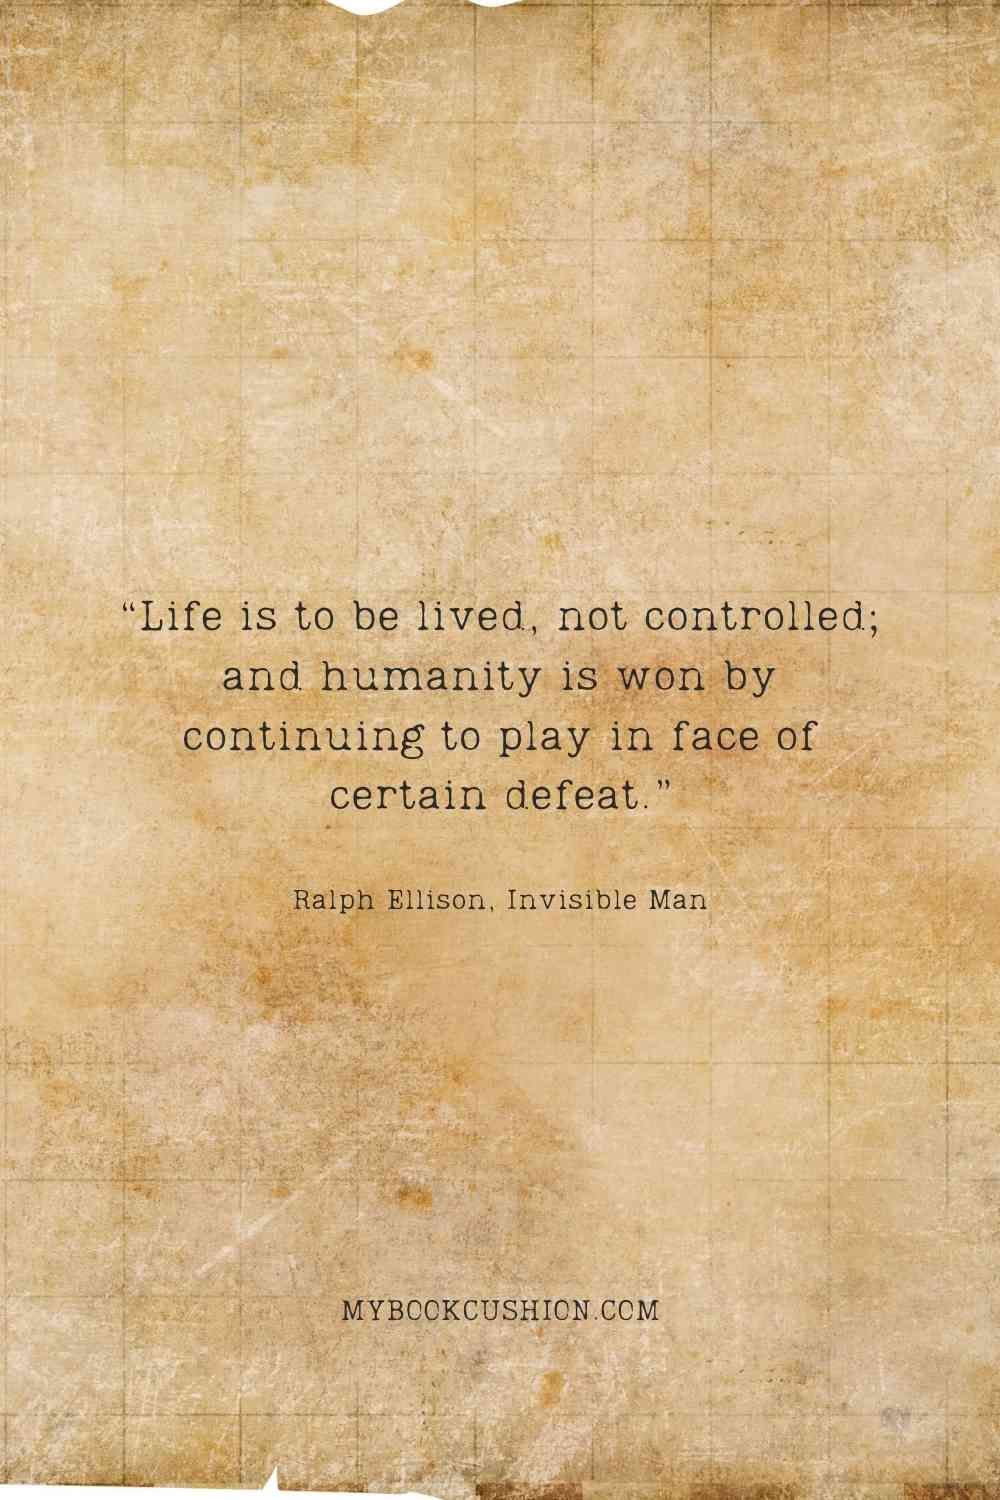 “Life is to be lived, not controlled; and humanity is won by continuing to play in face of certain defeat.” -Ralph Ellison, Invisible Man